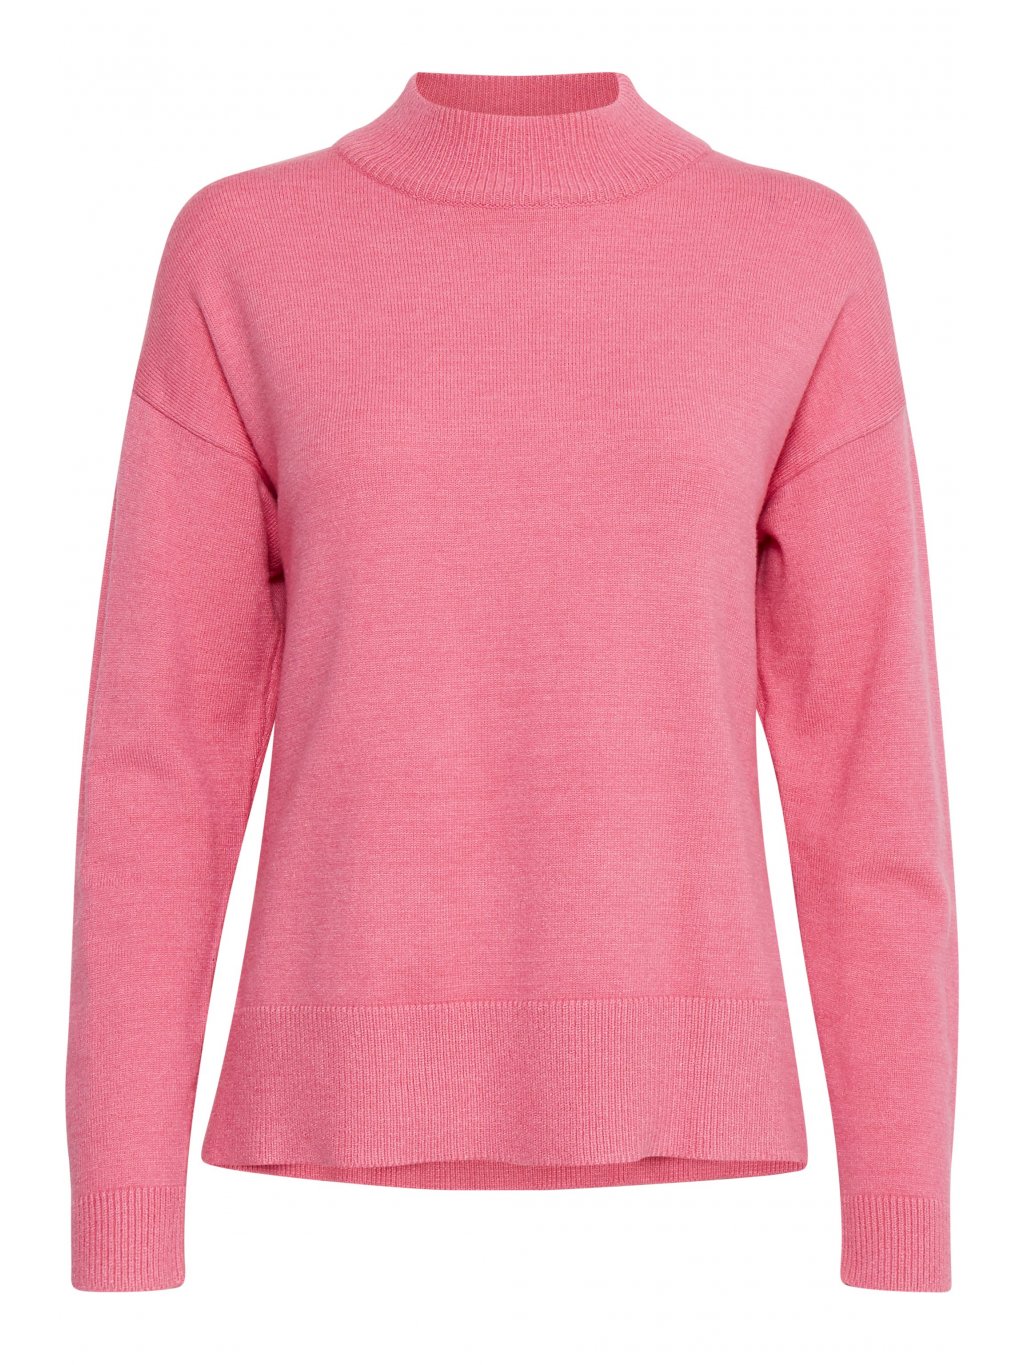 mel shocking pink knitted pullover